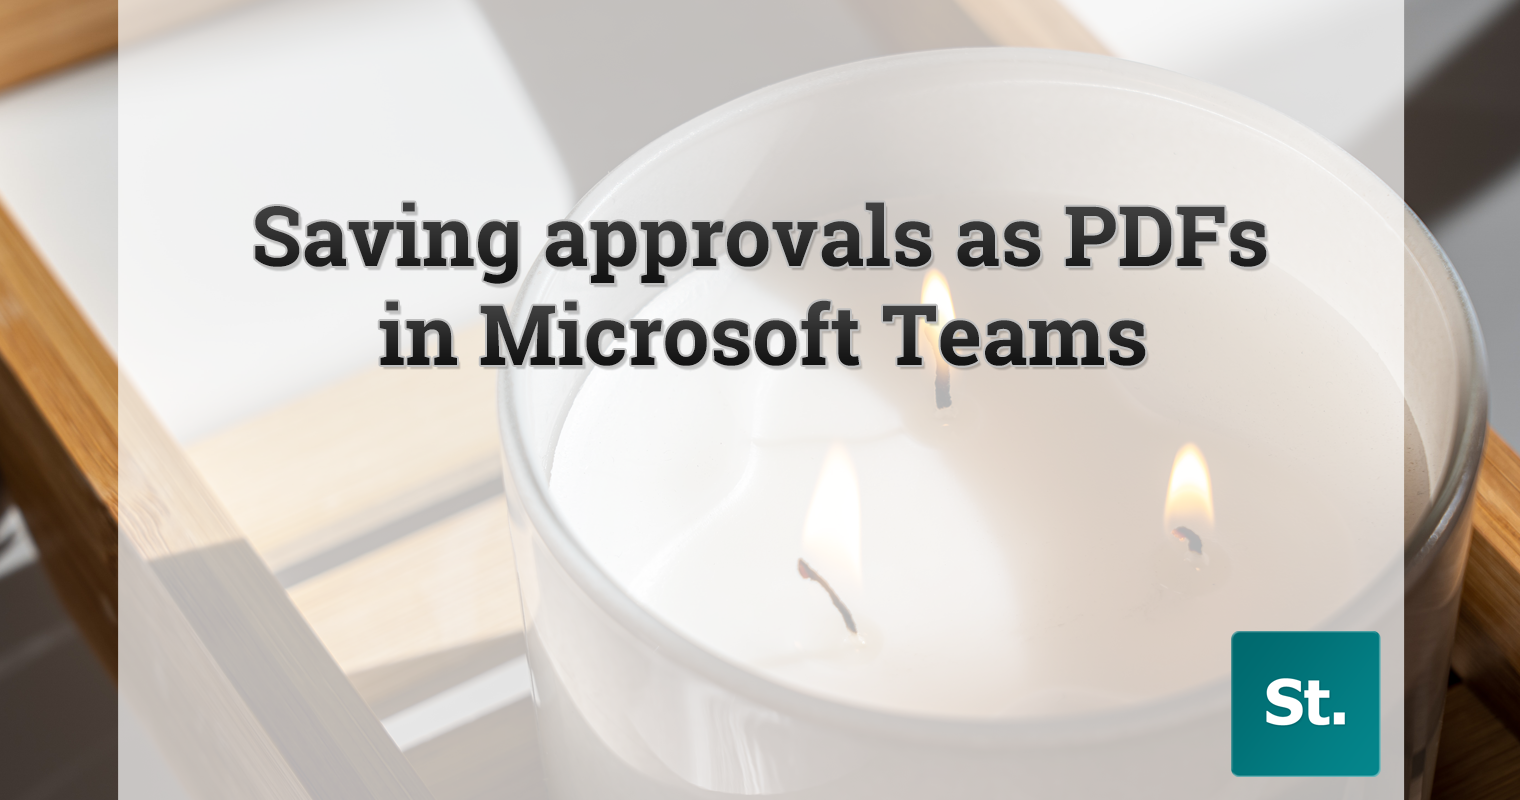 Saving approvals as PDFs in Microsoft Teams